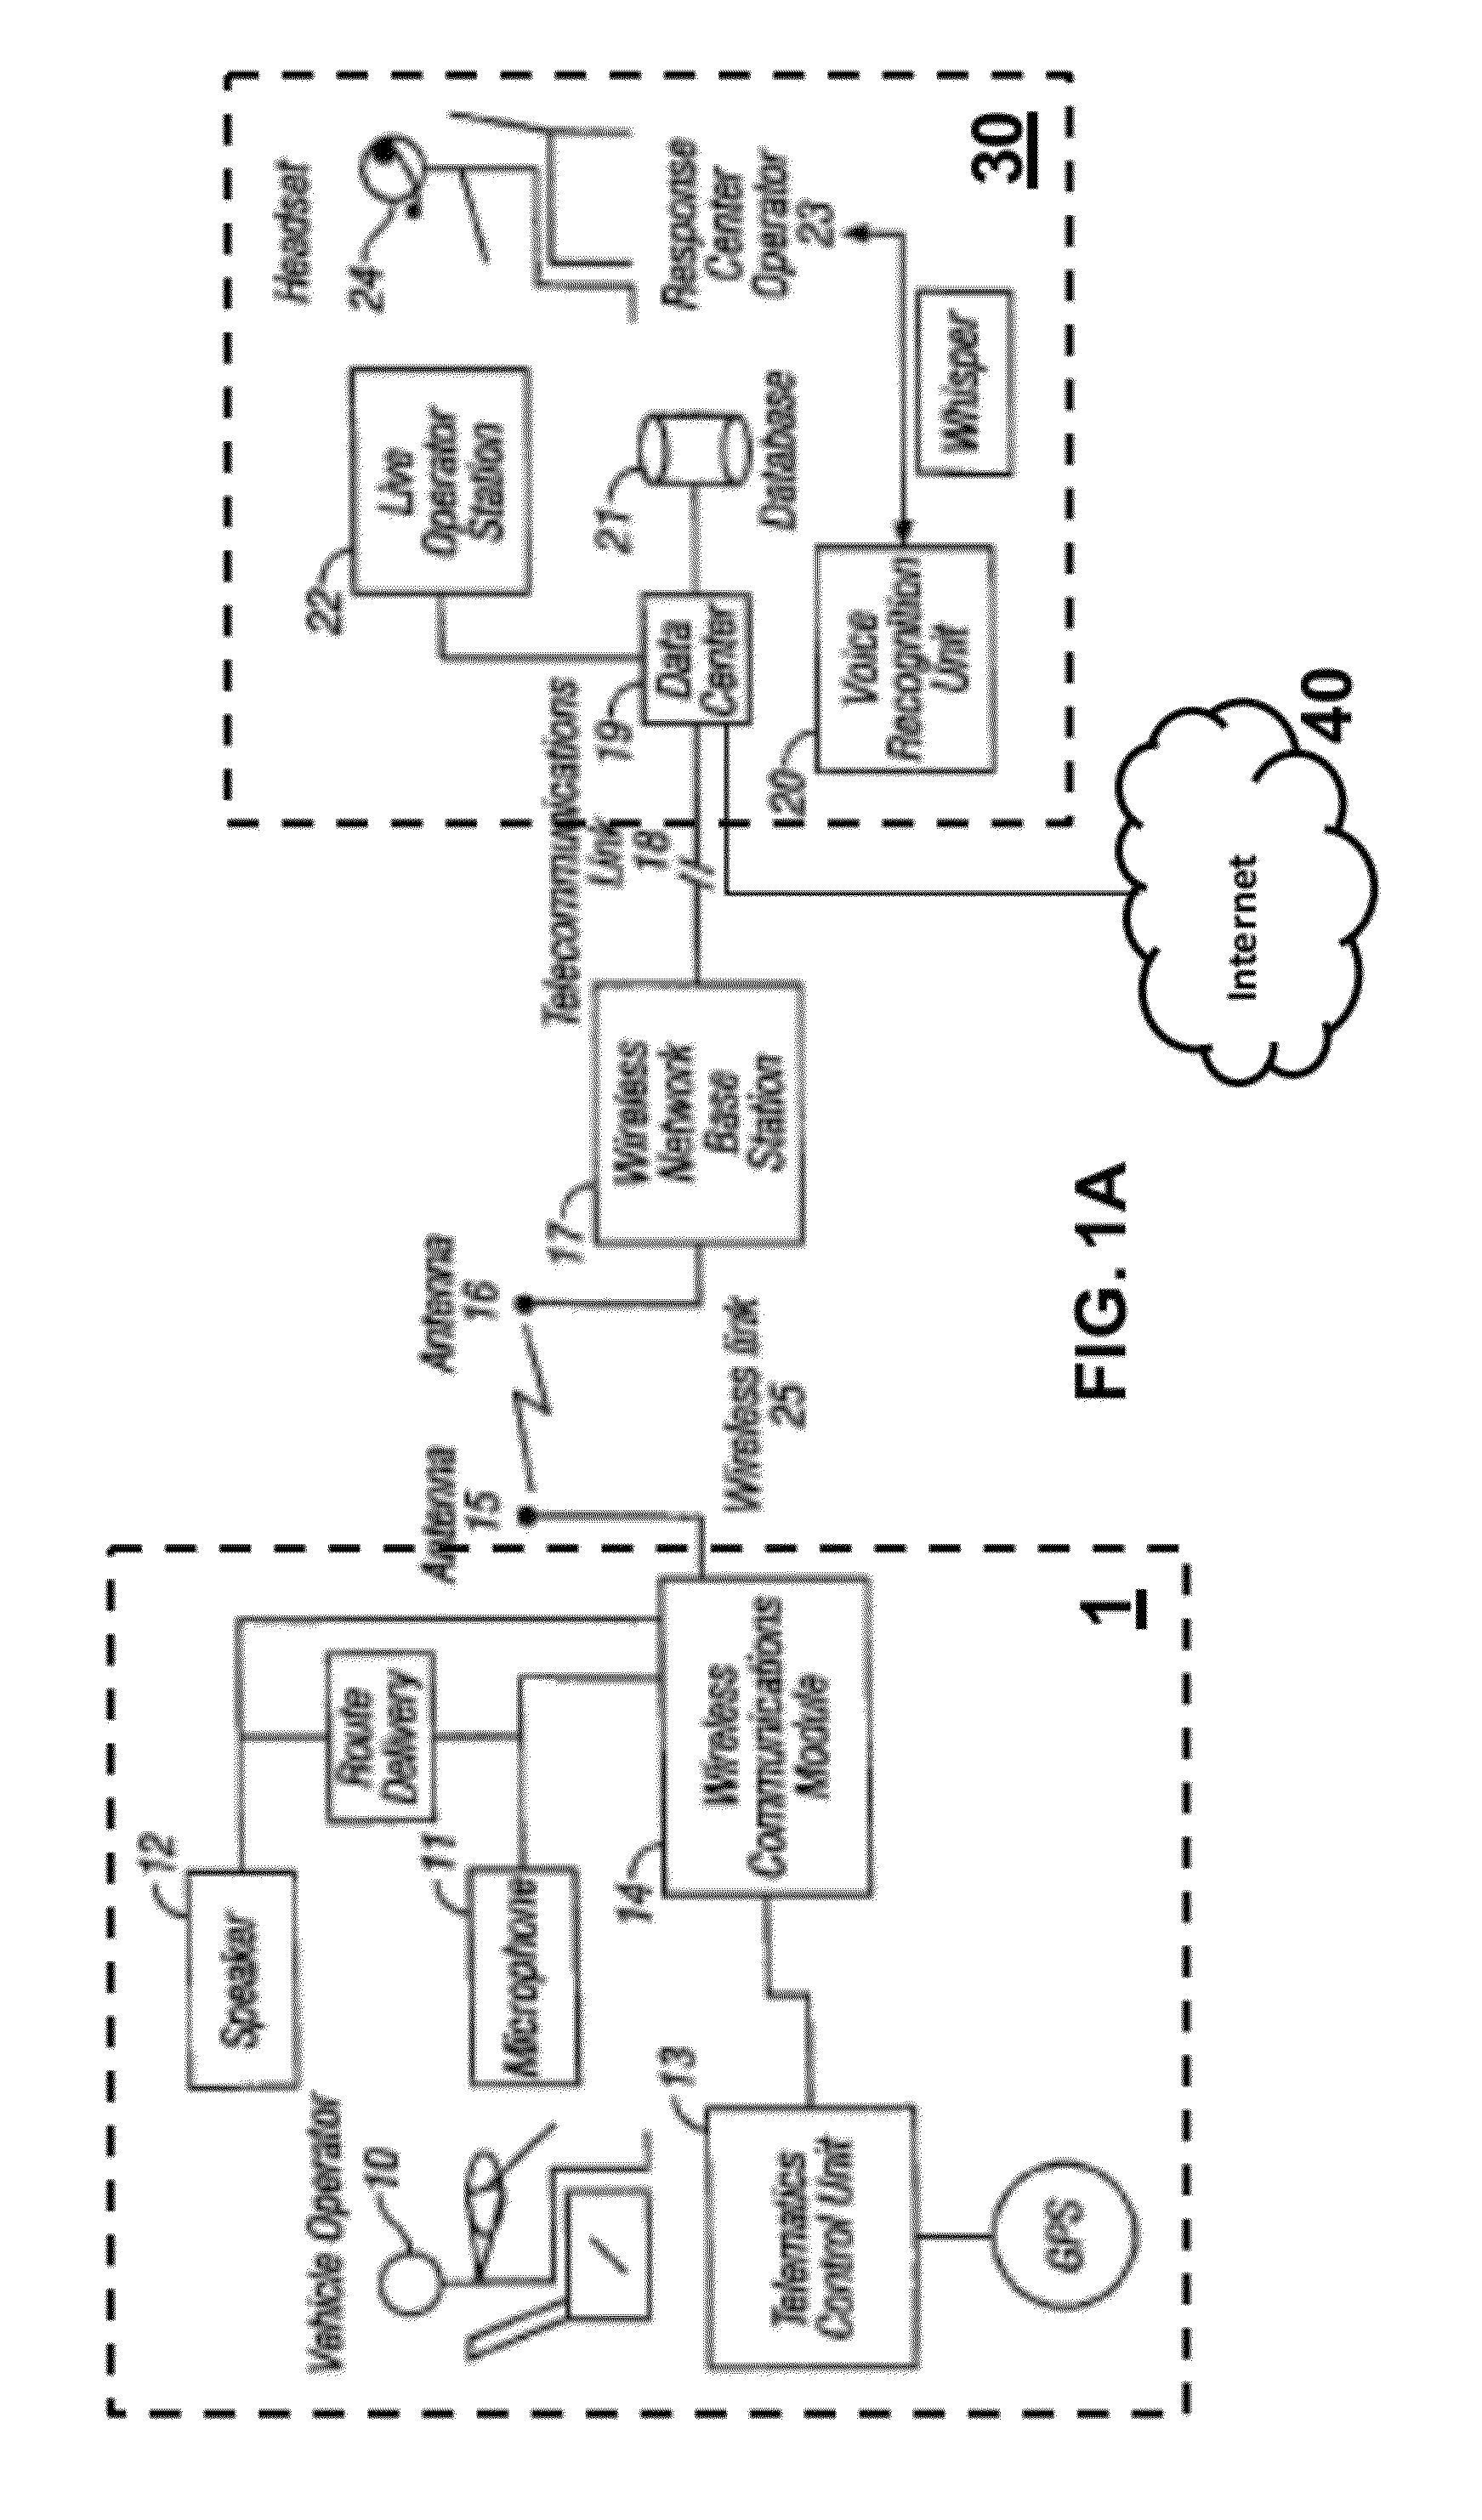 Systems and Methods for Managing Prompts for a Connected Vehicle